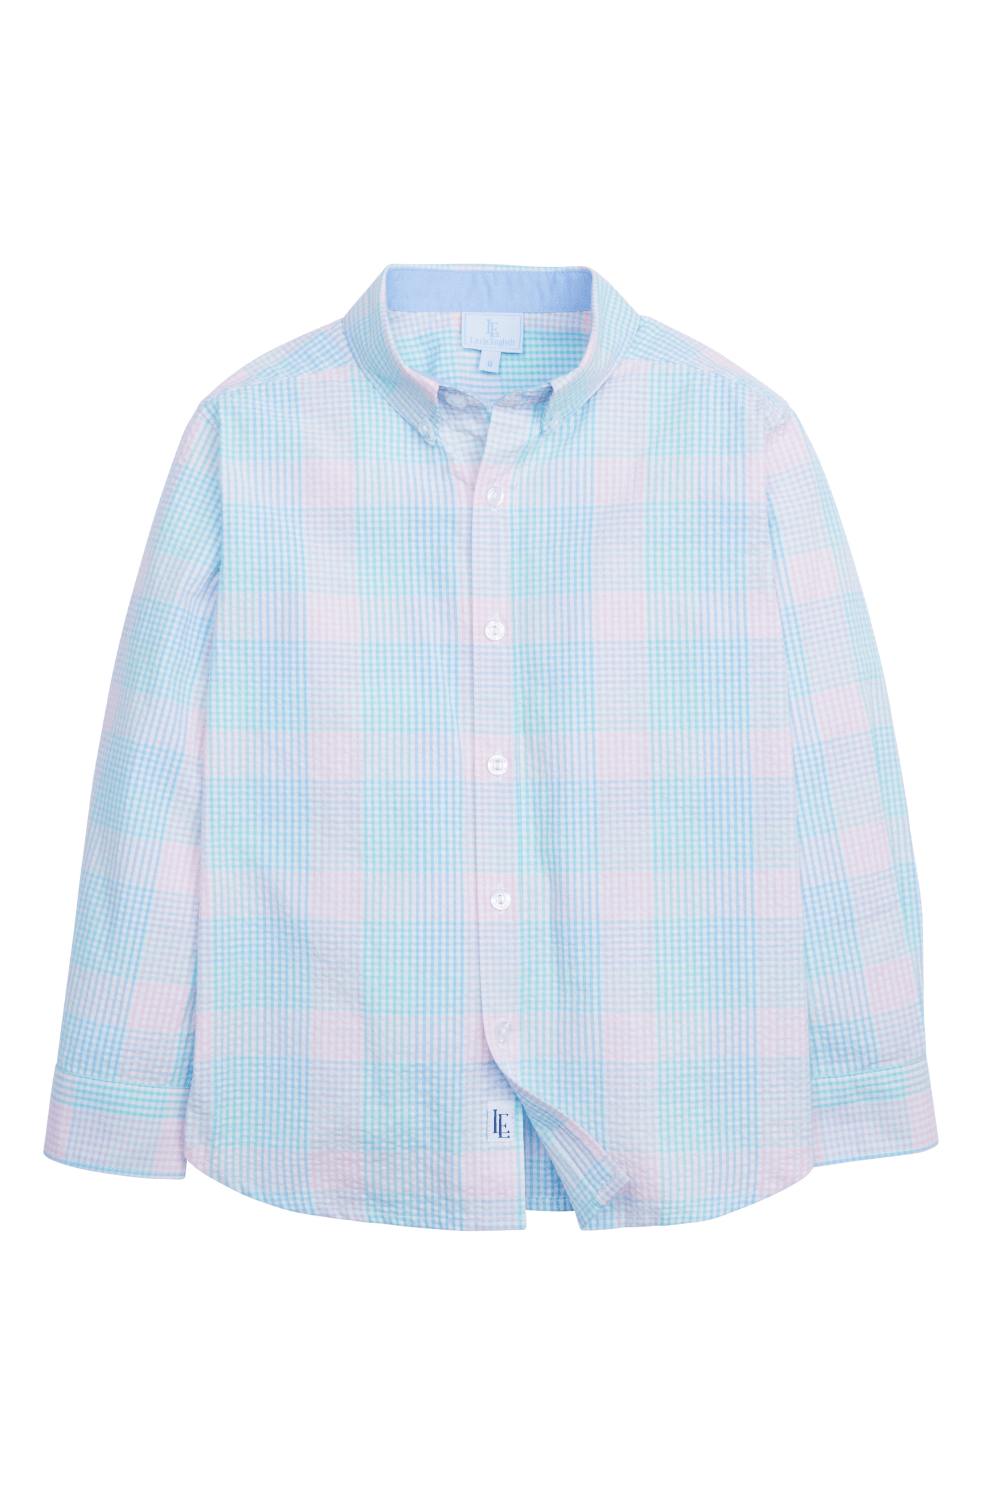 classic childrens clothing boys button down collared shirt in pink and blue plaid